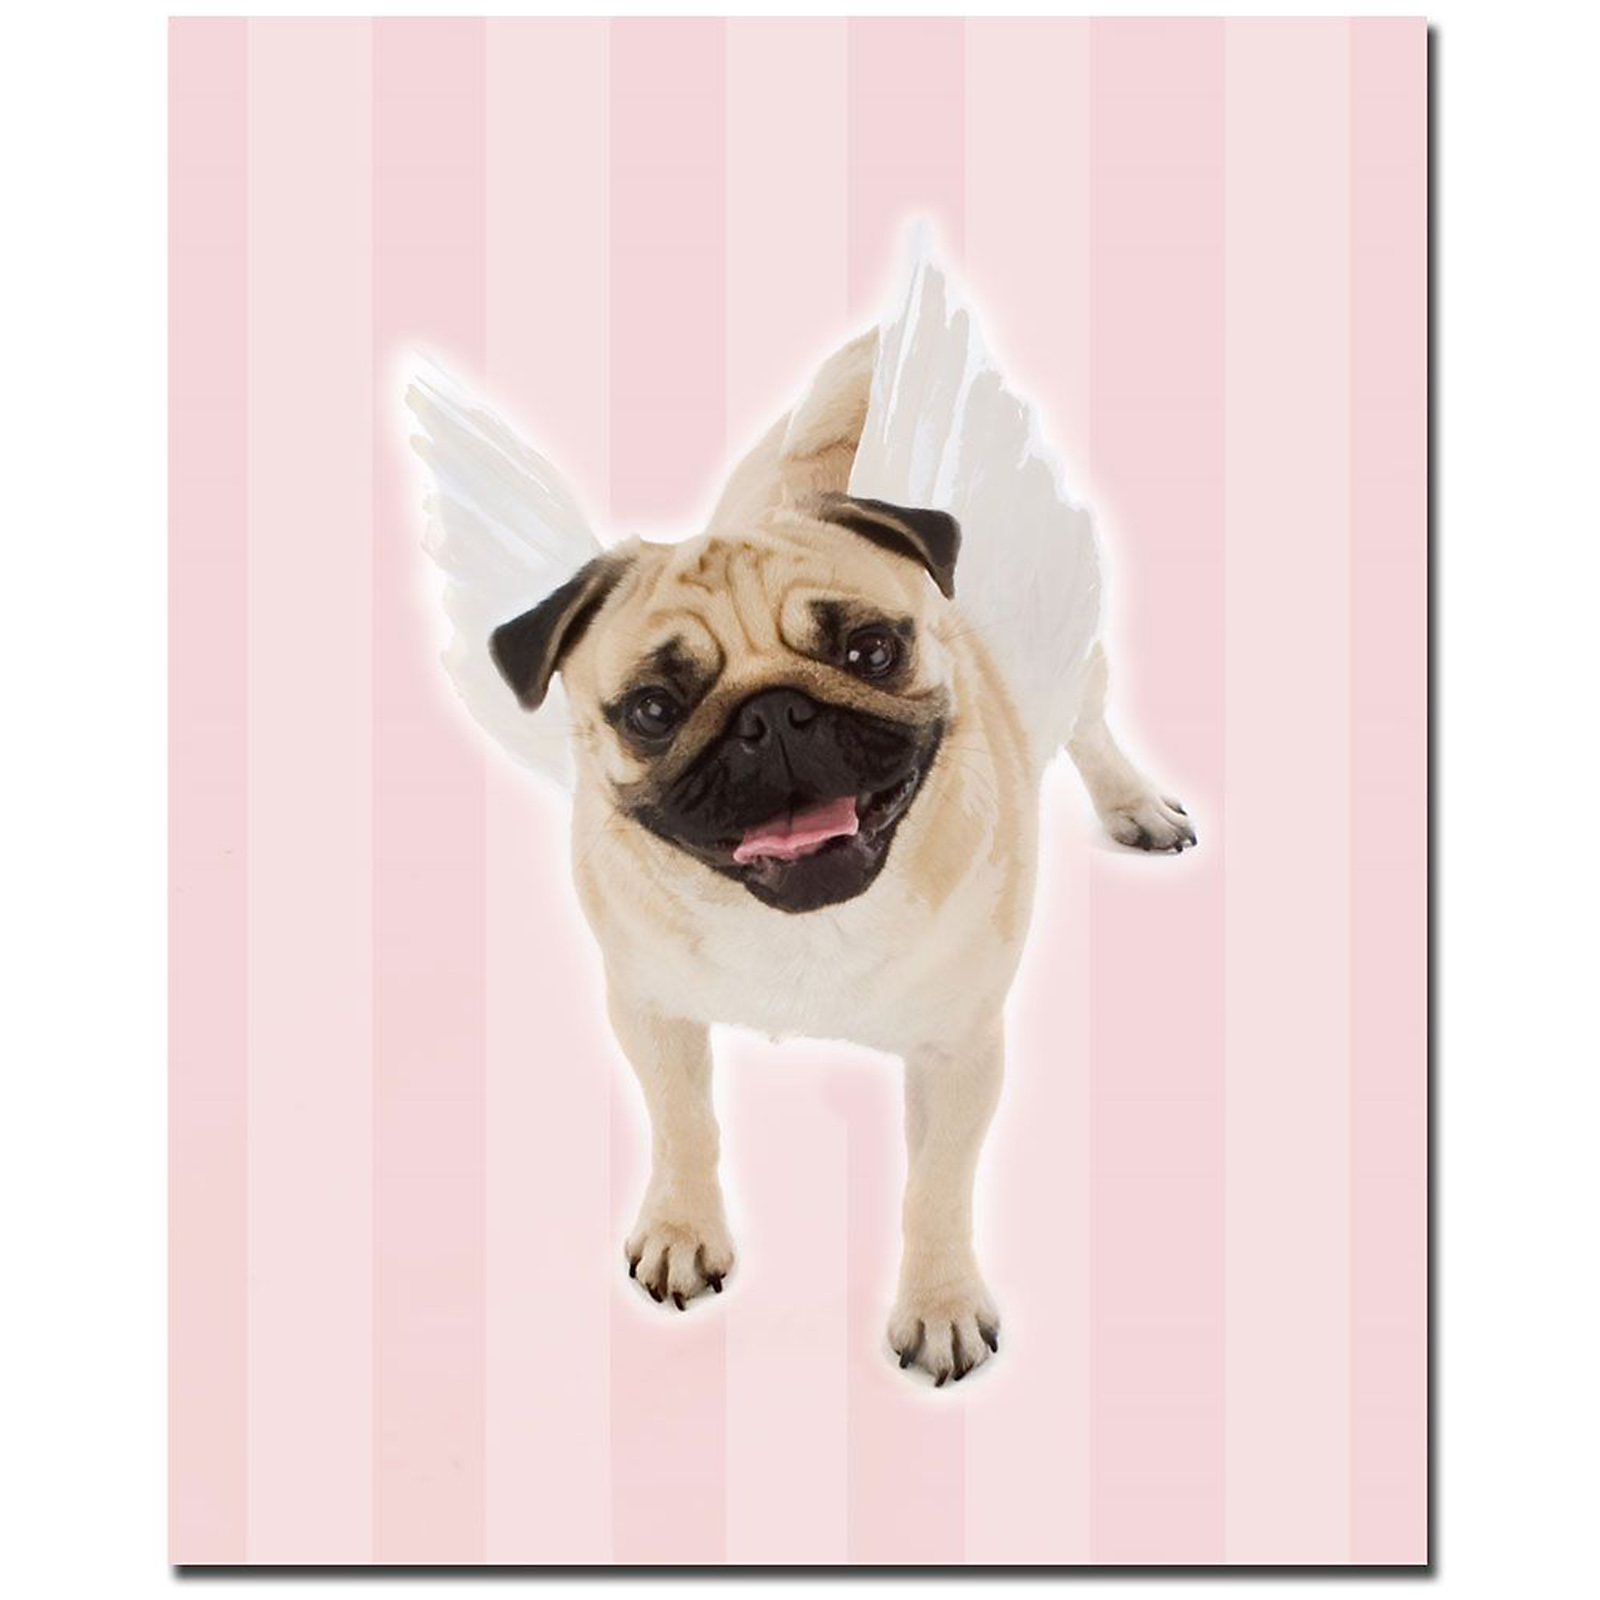 Trademark Global 26x32 inches "Pug Angel" by Gifty Idea Greeting Cards and Such!